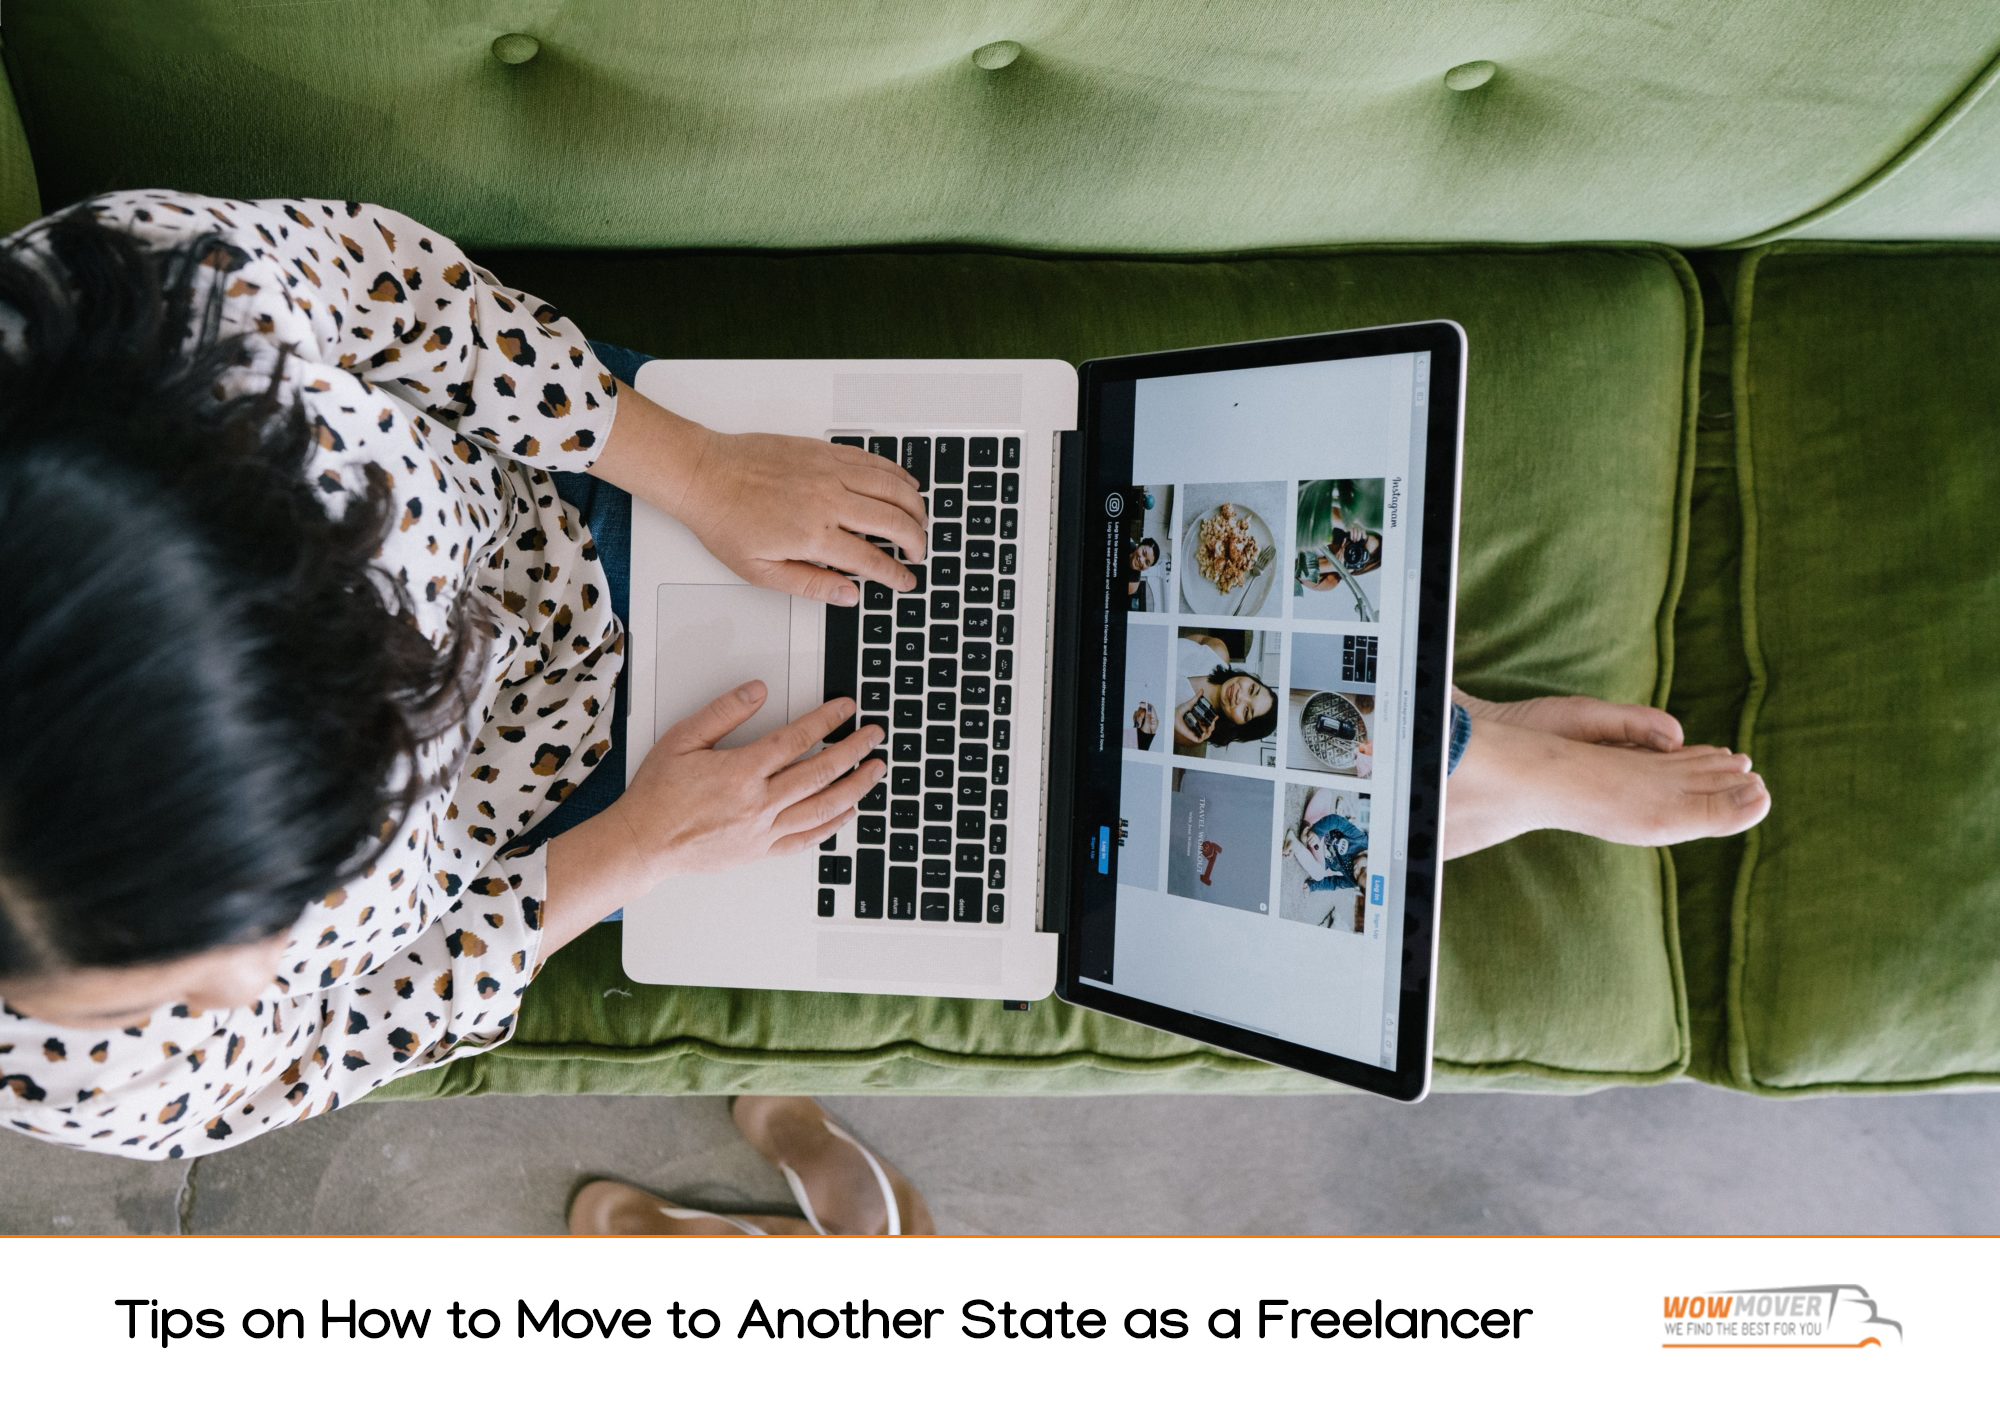 Tips on How to Move to Another State as a Freelancer